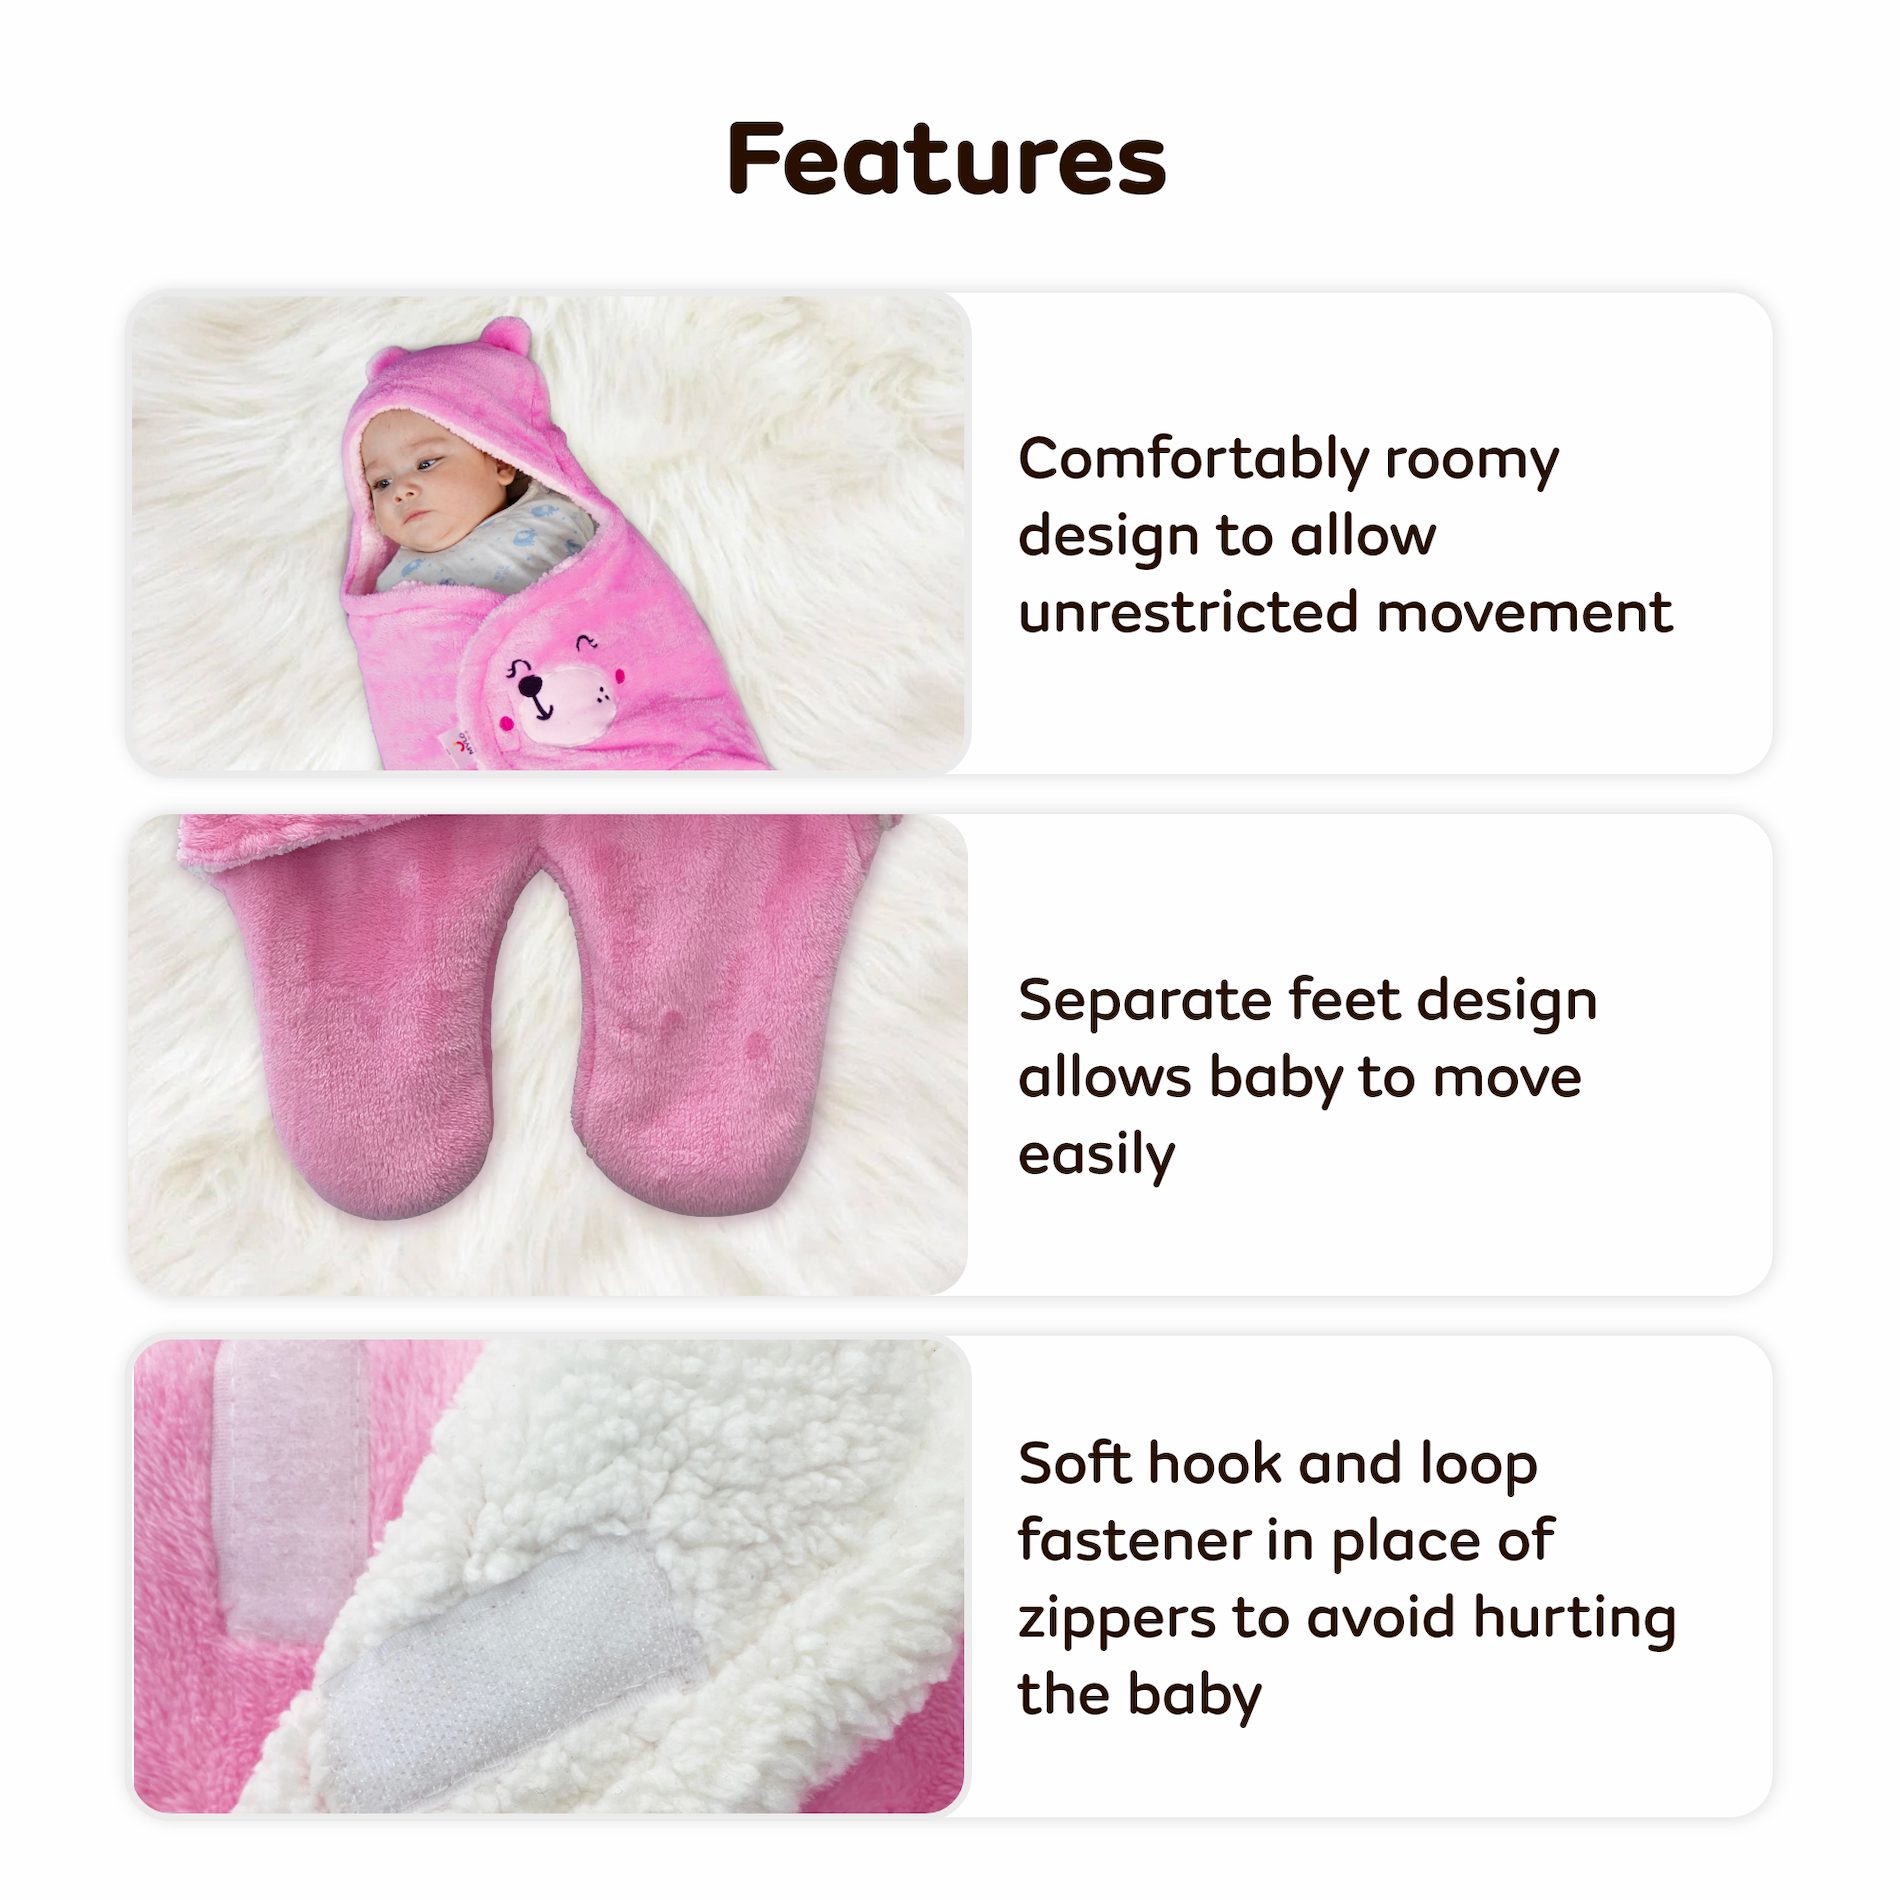 4-in-1 All Season Baby Swaddle-Wrapper For New Born Baby (0-6 months) - Light Pink